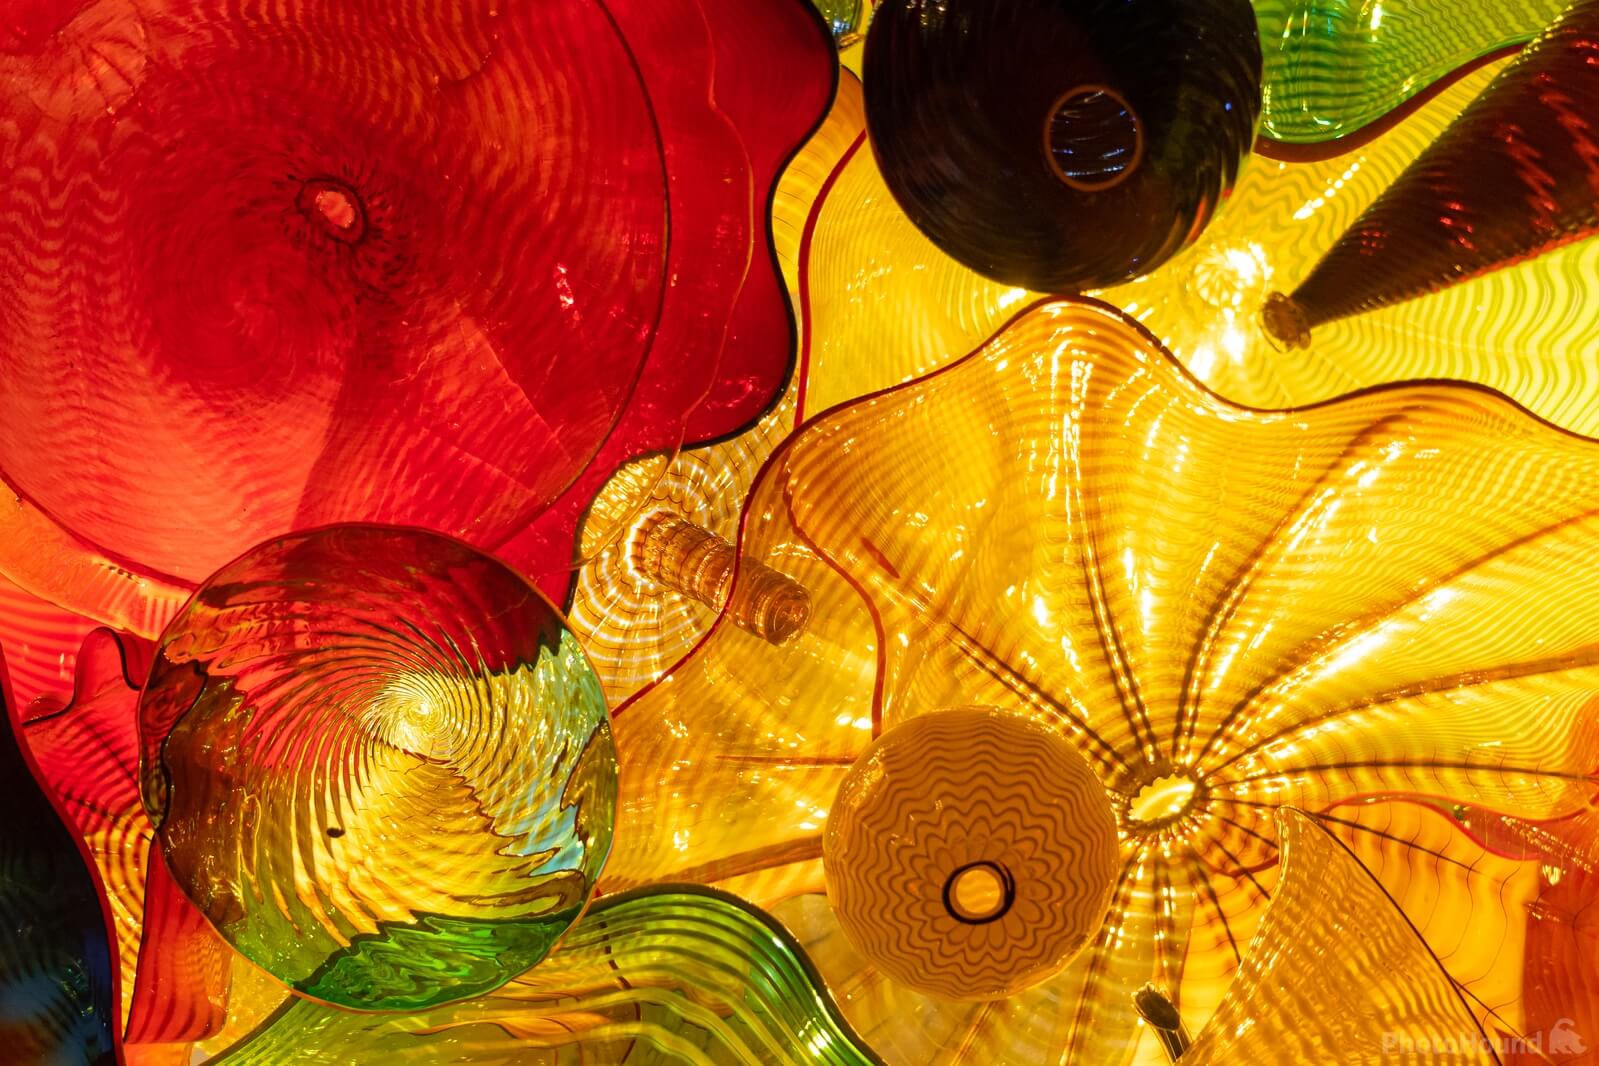 Image of The Chihuly Garden and Glass – Seattle Center by Adams Rosales